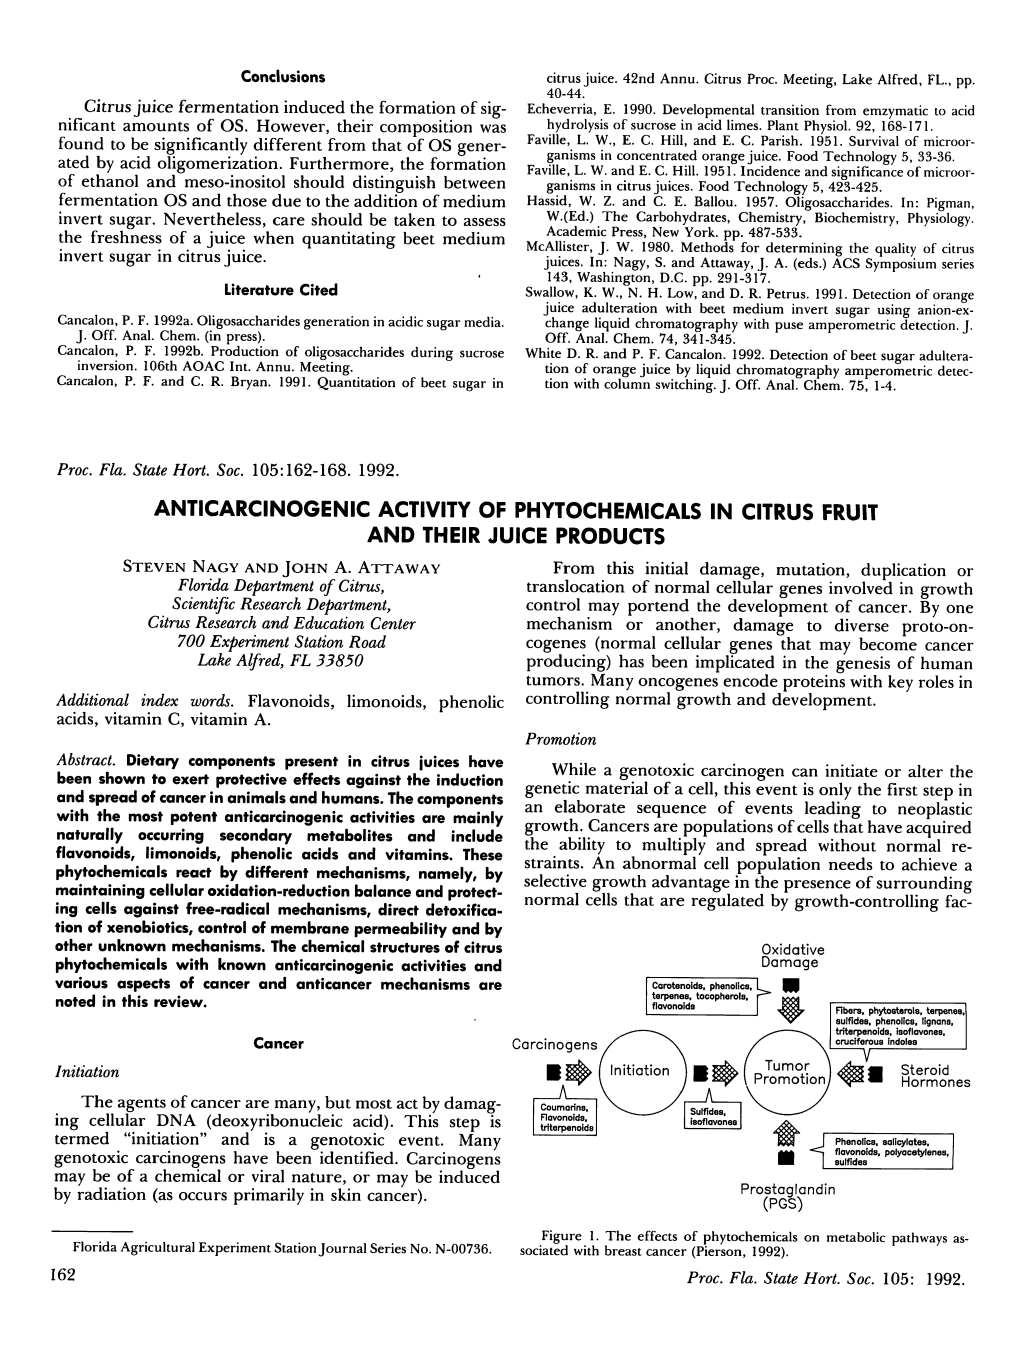 Anticarcinogenic Activity of Phytochemicals in Citrus Fruit and Their Juice Products